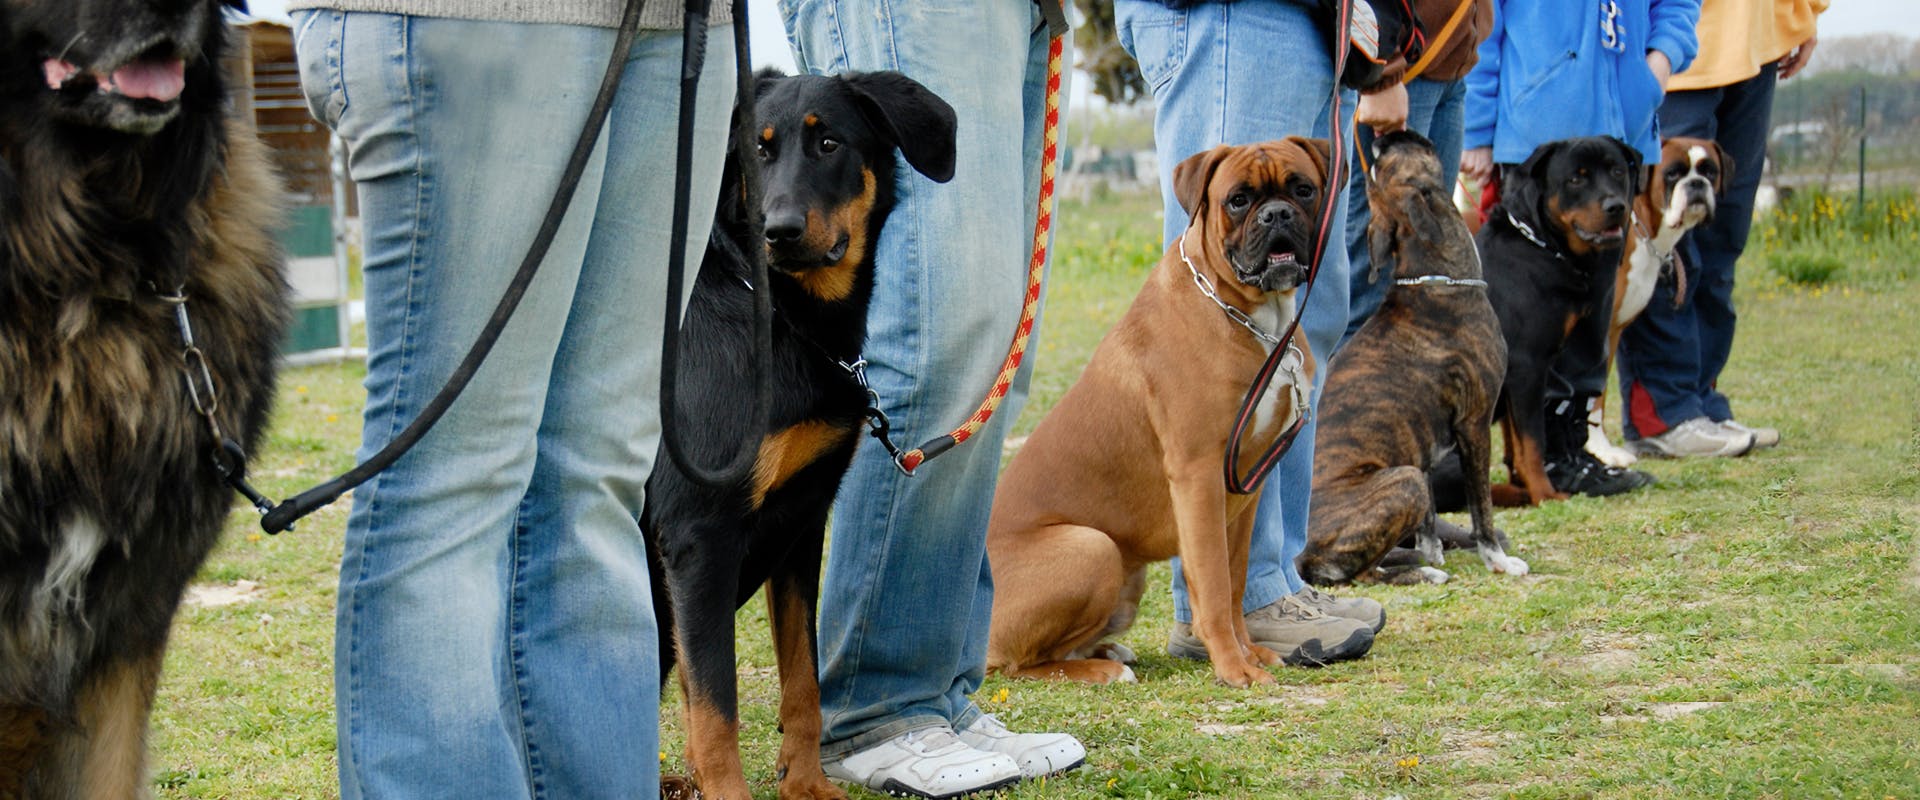 A group of dogs lined up in a dog training class